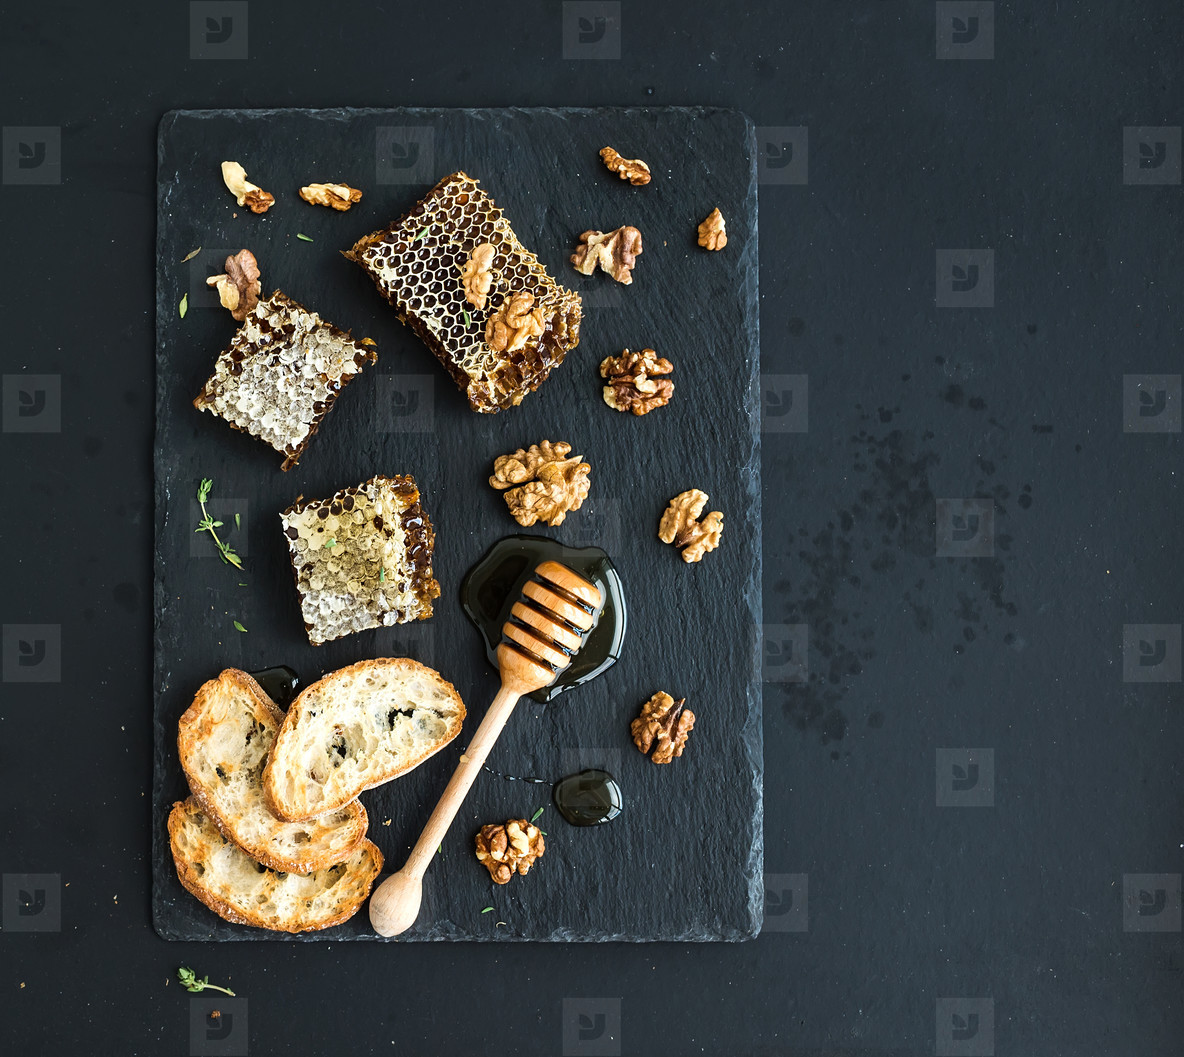 Honeycomb, walnuts, bread slices and honey dipper on black slate tray over grunge dark backdrop, top view